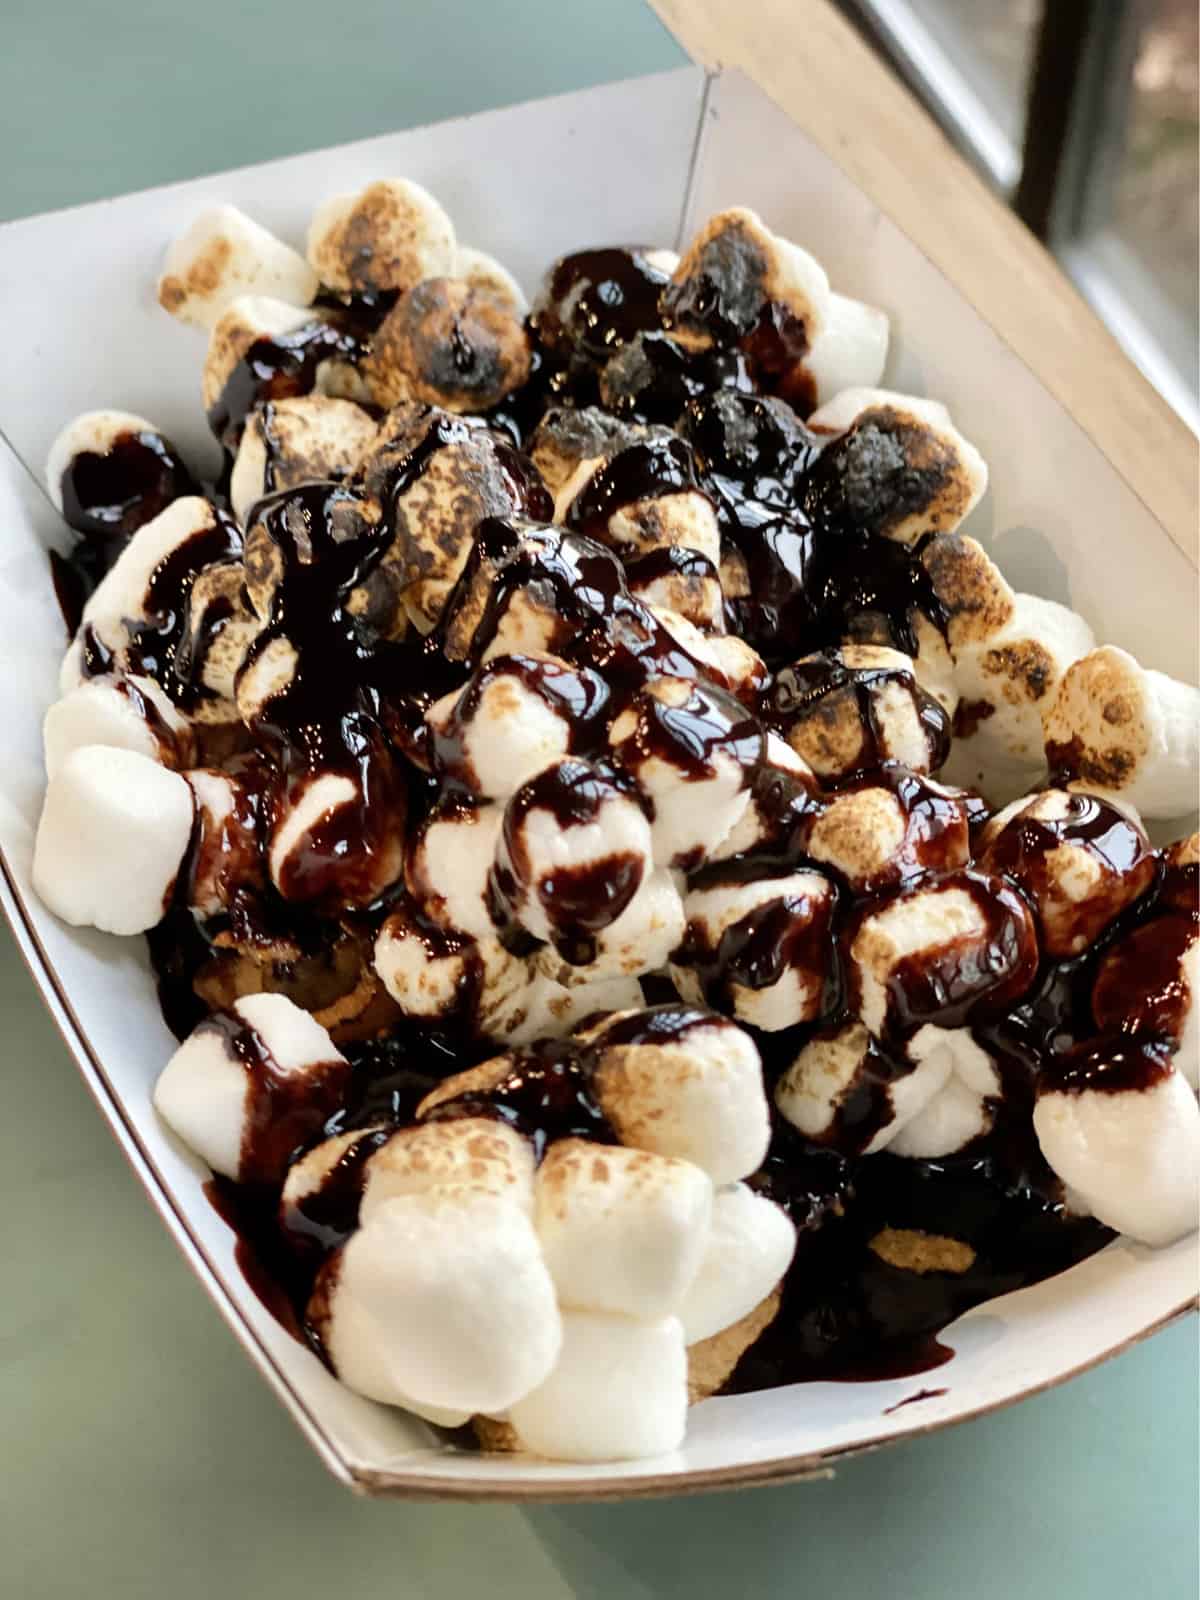 Paper tray full of marshmallows with chocolate sauce drizzled on top. 